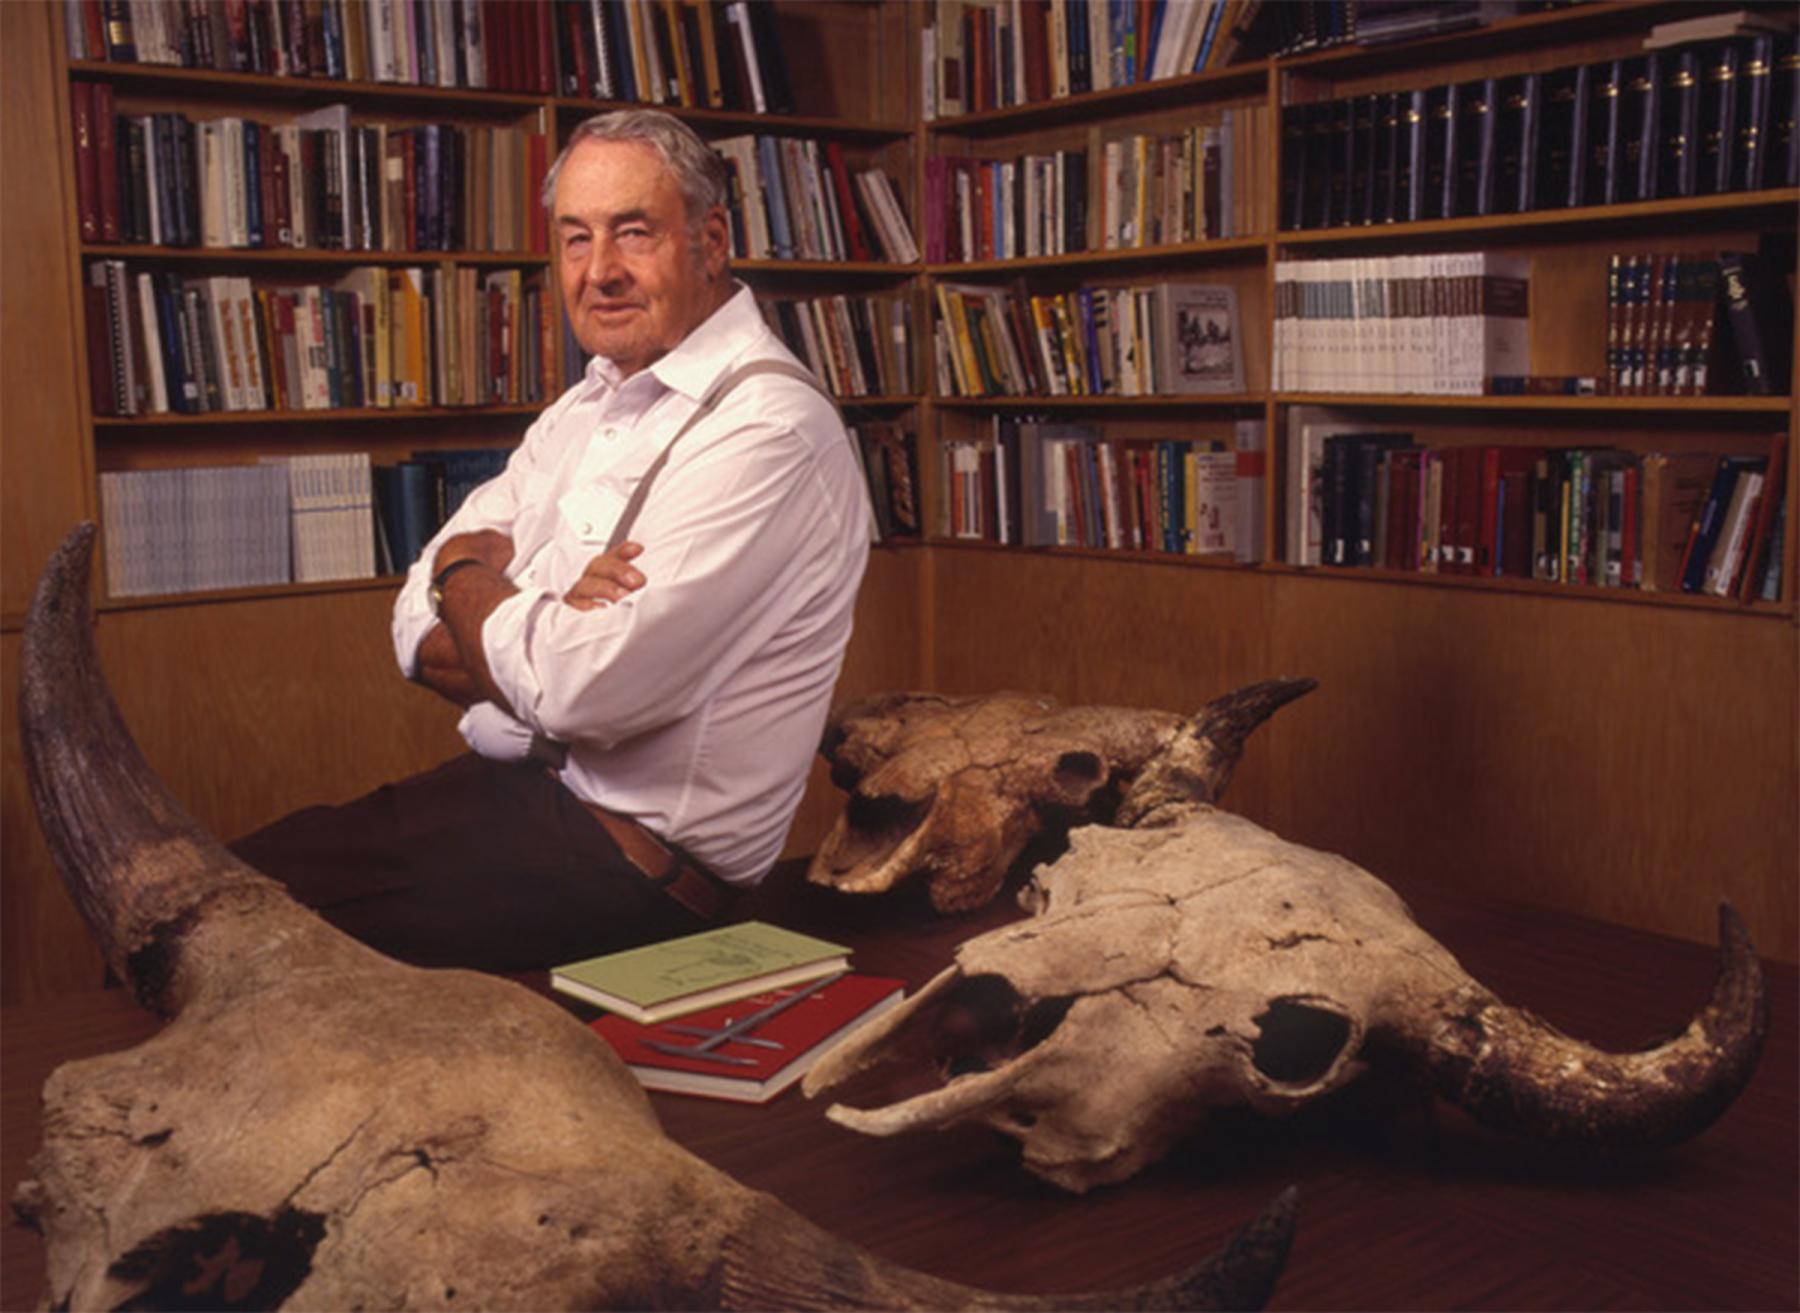 George Frison in his office with ancient bison skulls, late in his career. He was elected to the National Academy of Sciences in 1997. Ted Brummond, UW photo service. 